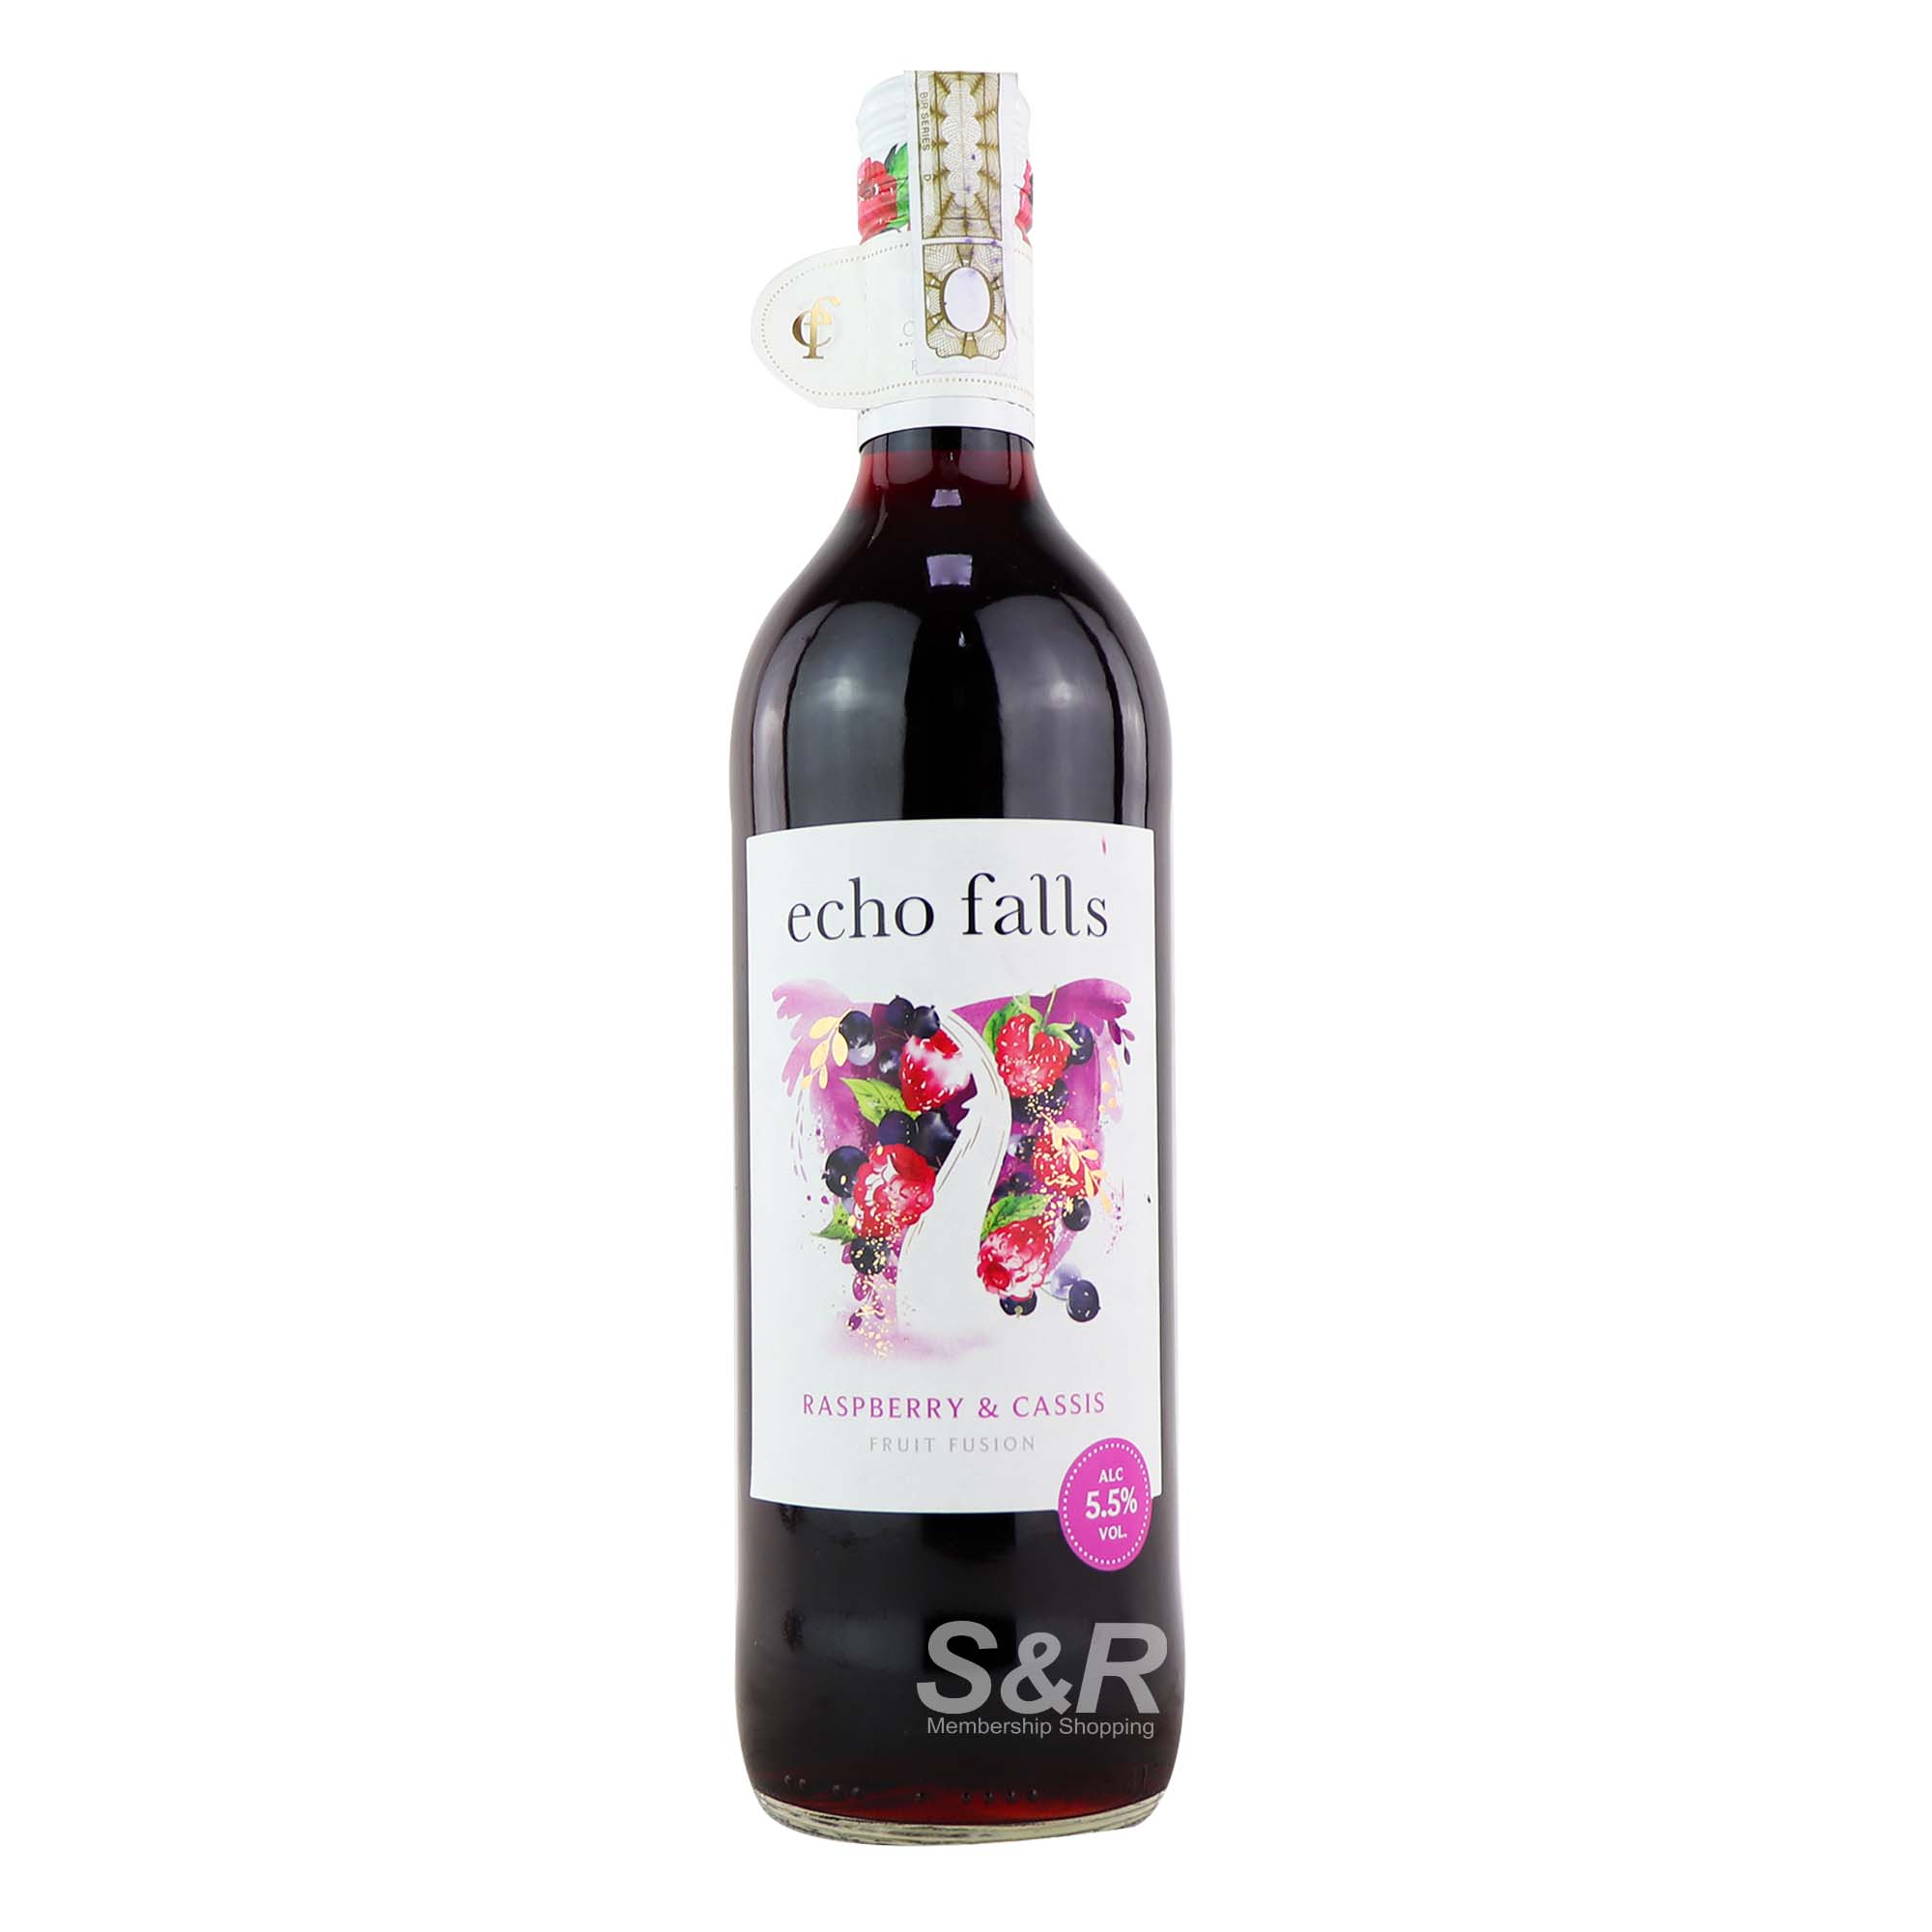 Echo Falls Fruit Fusion Raspberry & Cassis Red Wine 750mL